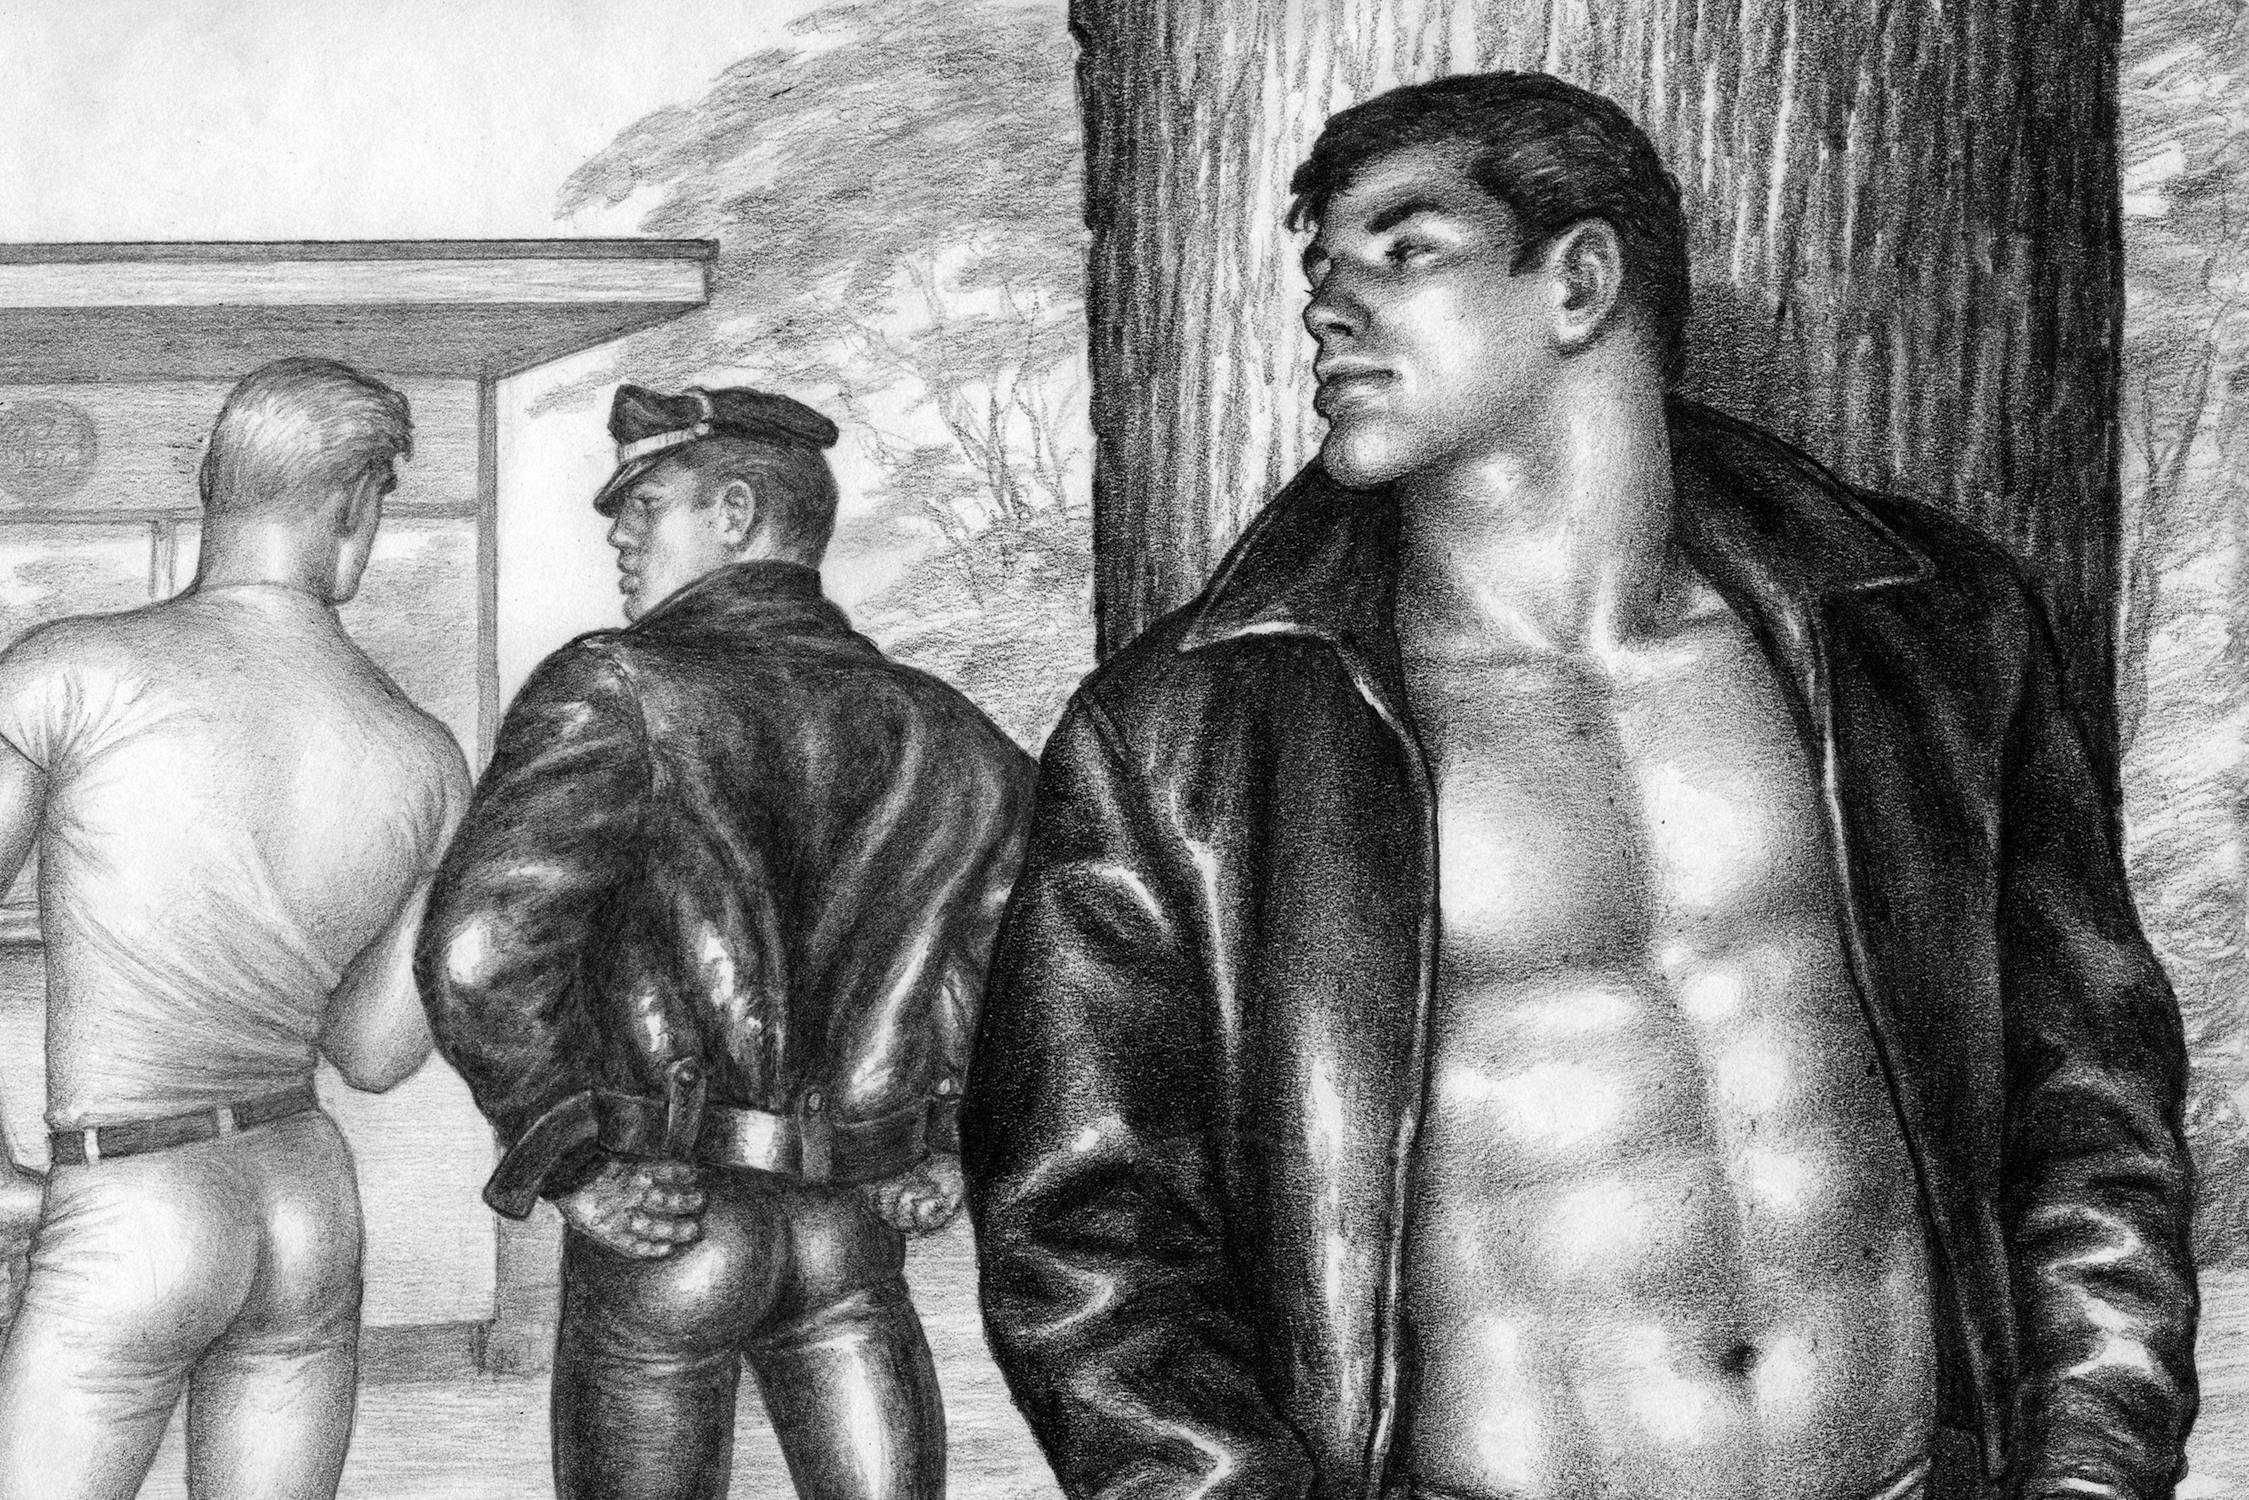 a detailed pencil drawing of a man wearing an open leather jacket to reveal muscular abs, looking back at two men in tight denim and leather outfits